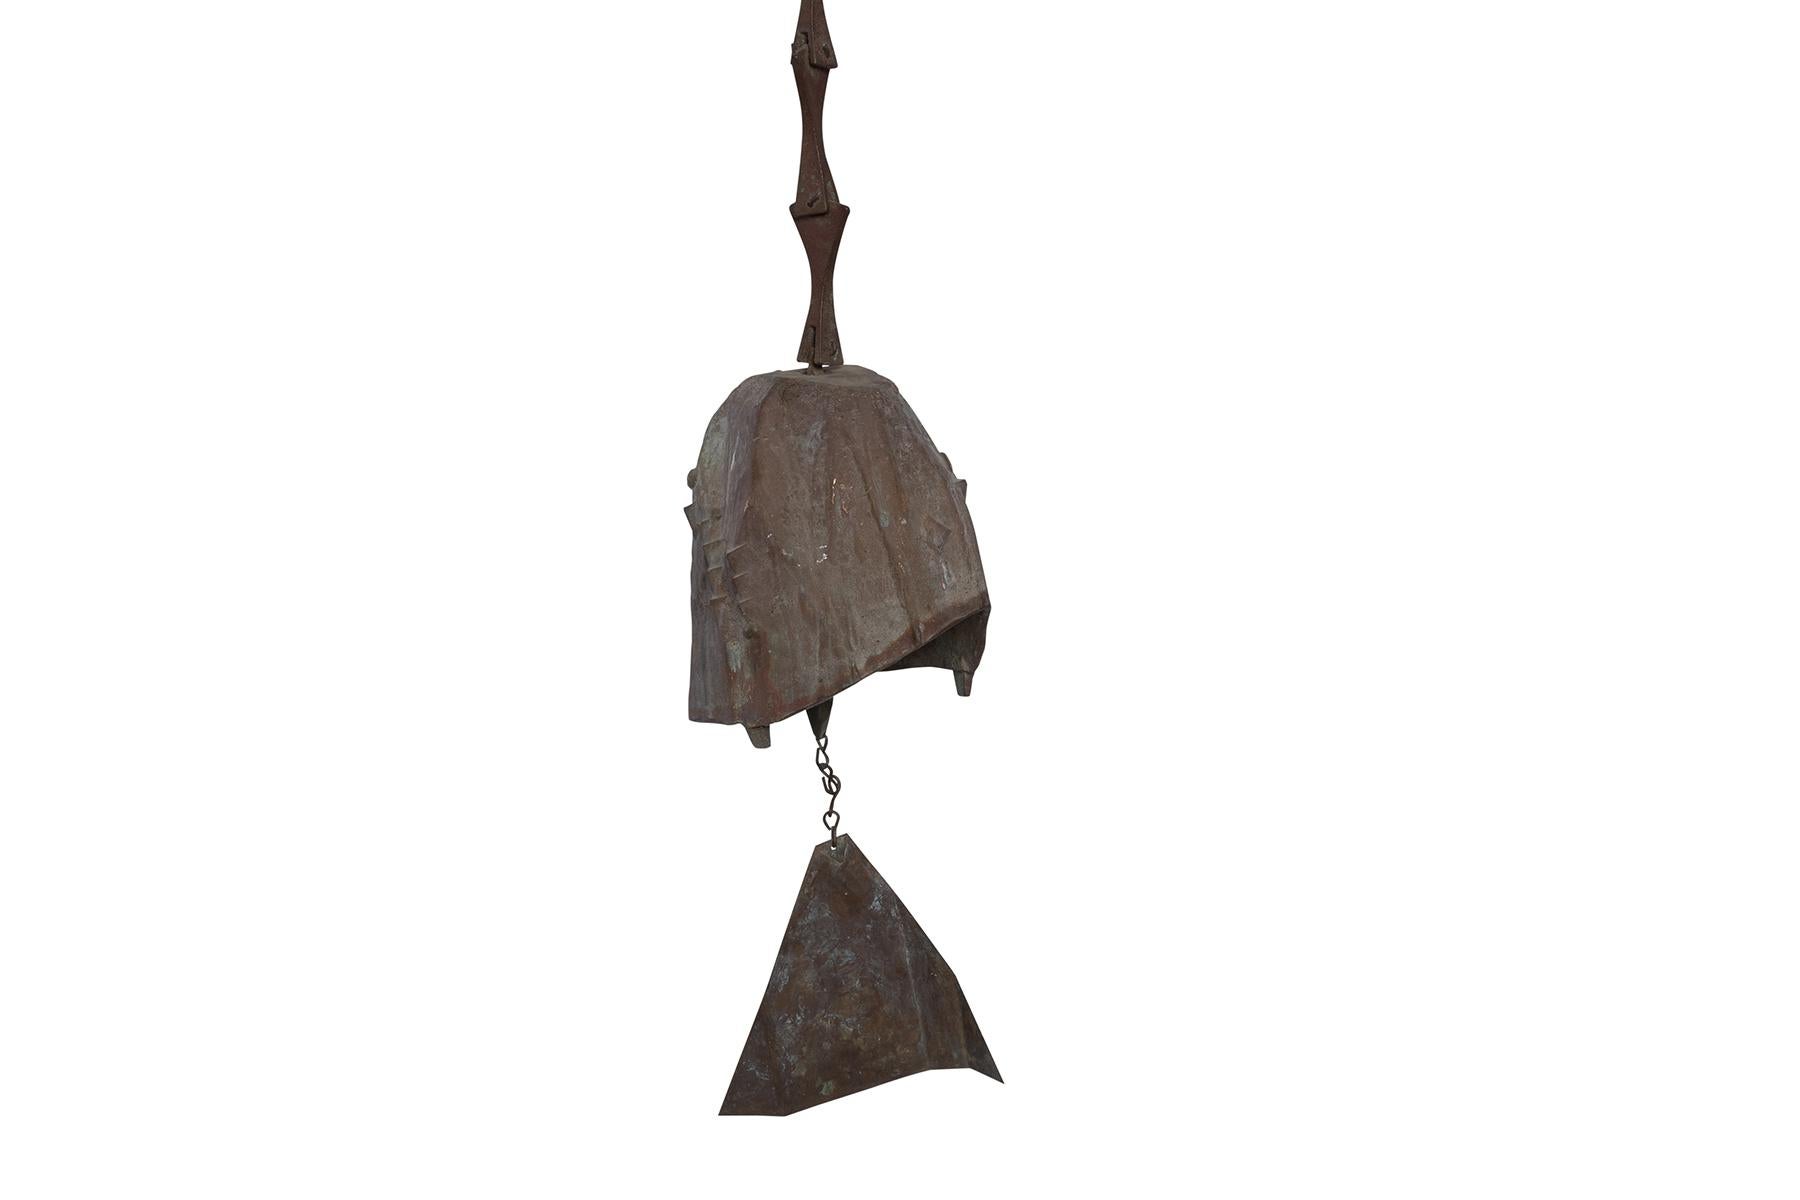 All original, early, beautifully patinated bronze bell by Paolo Soleri. 